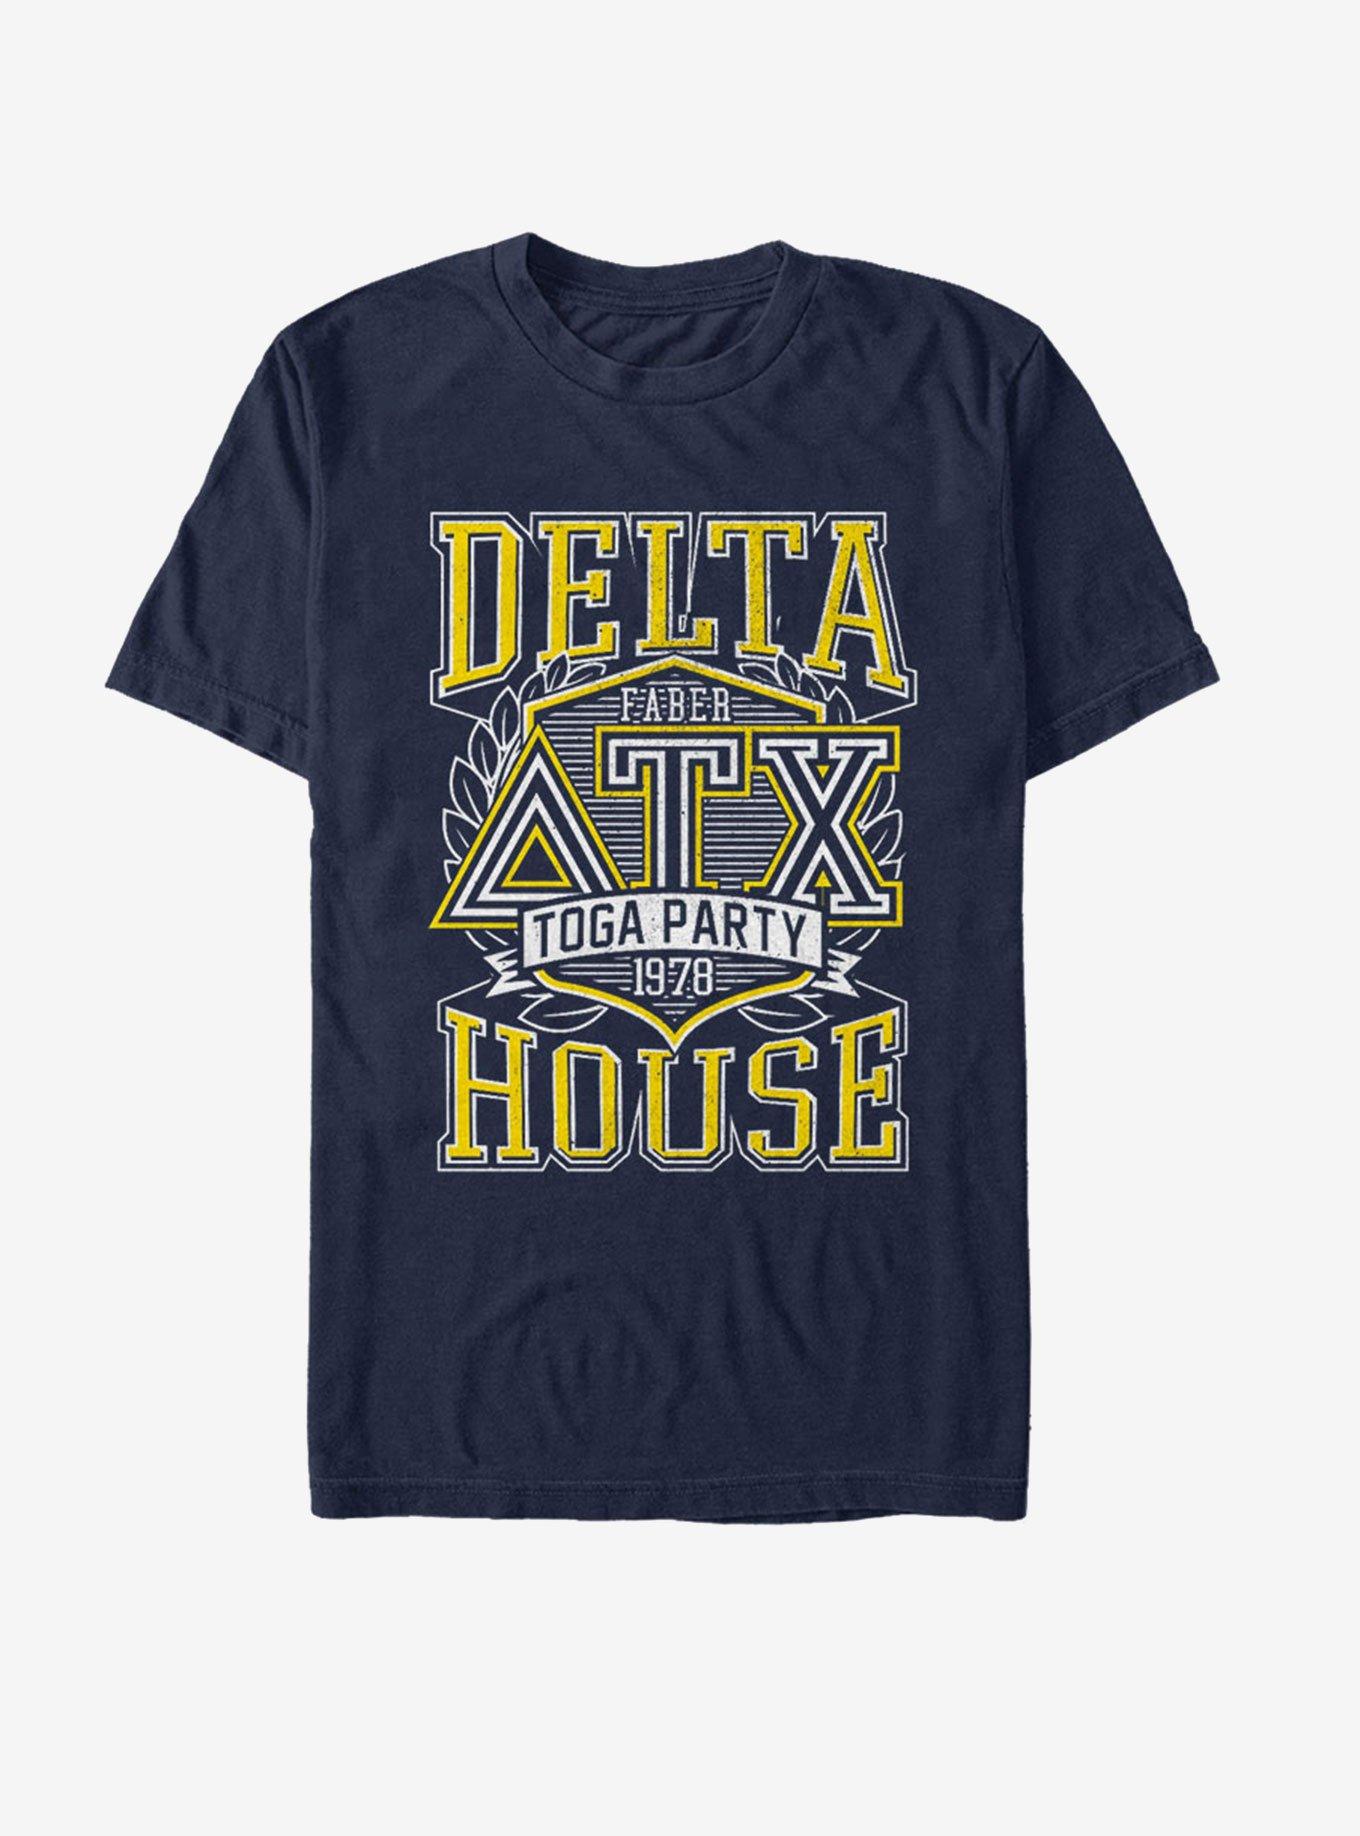 Animal House Toga Party T-Shirt, NAVY, hi-res